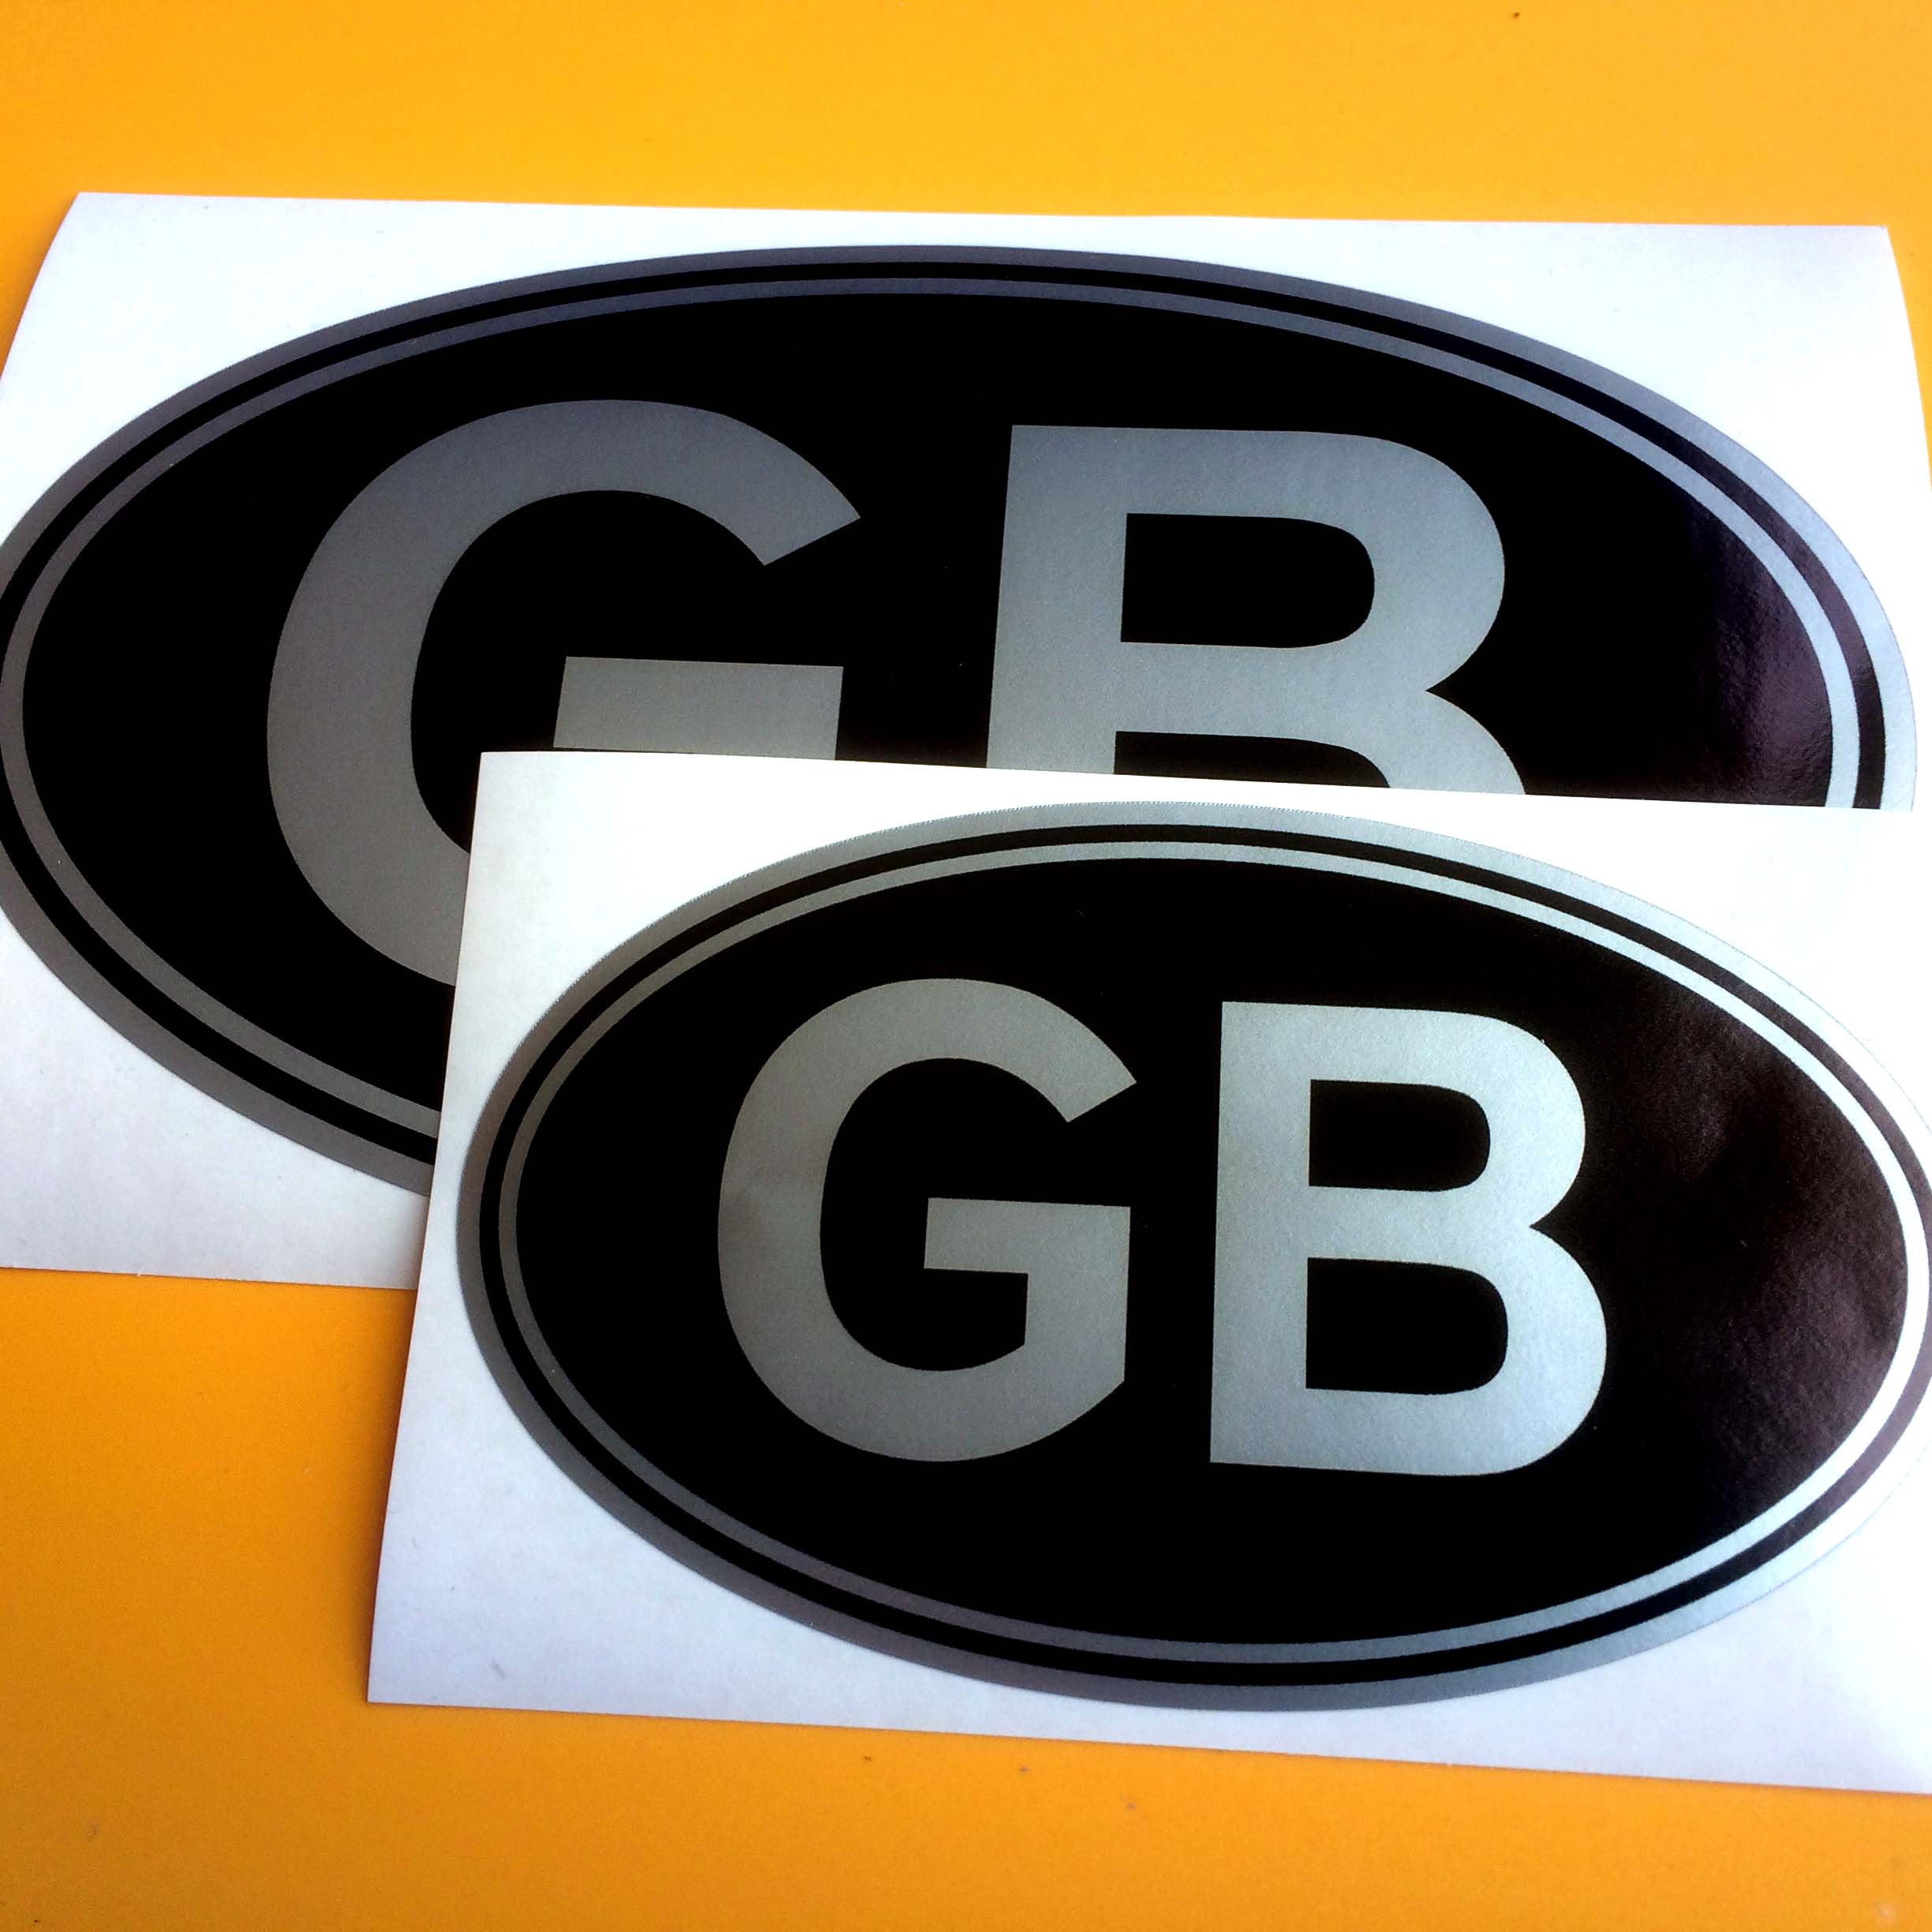 GB SILVER AND BLACK STICKER. GB in bold silver lettering on a black oval sticker with a silver border.